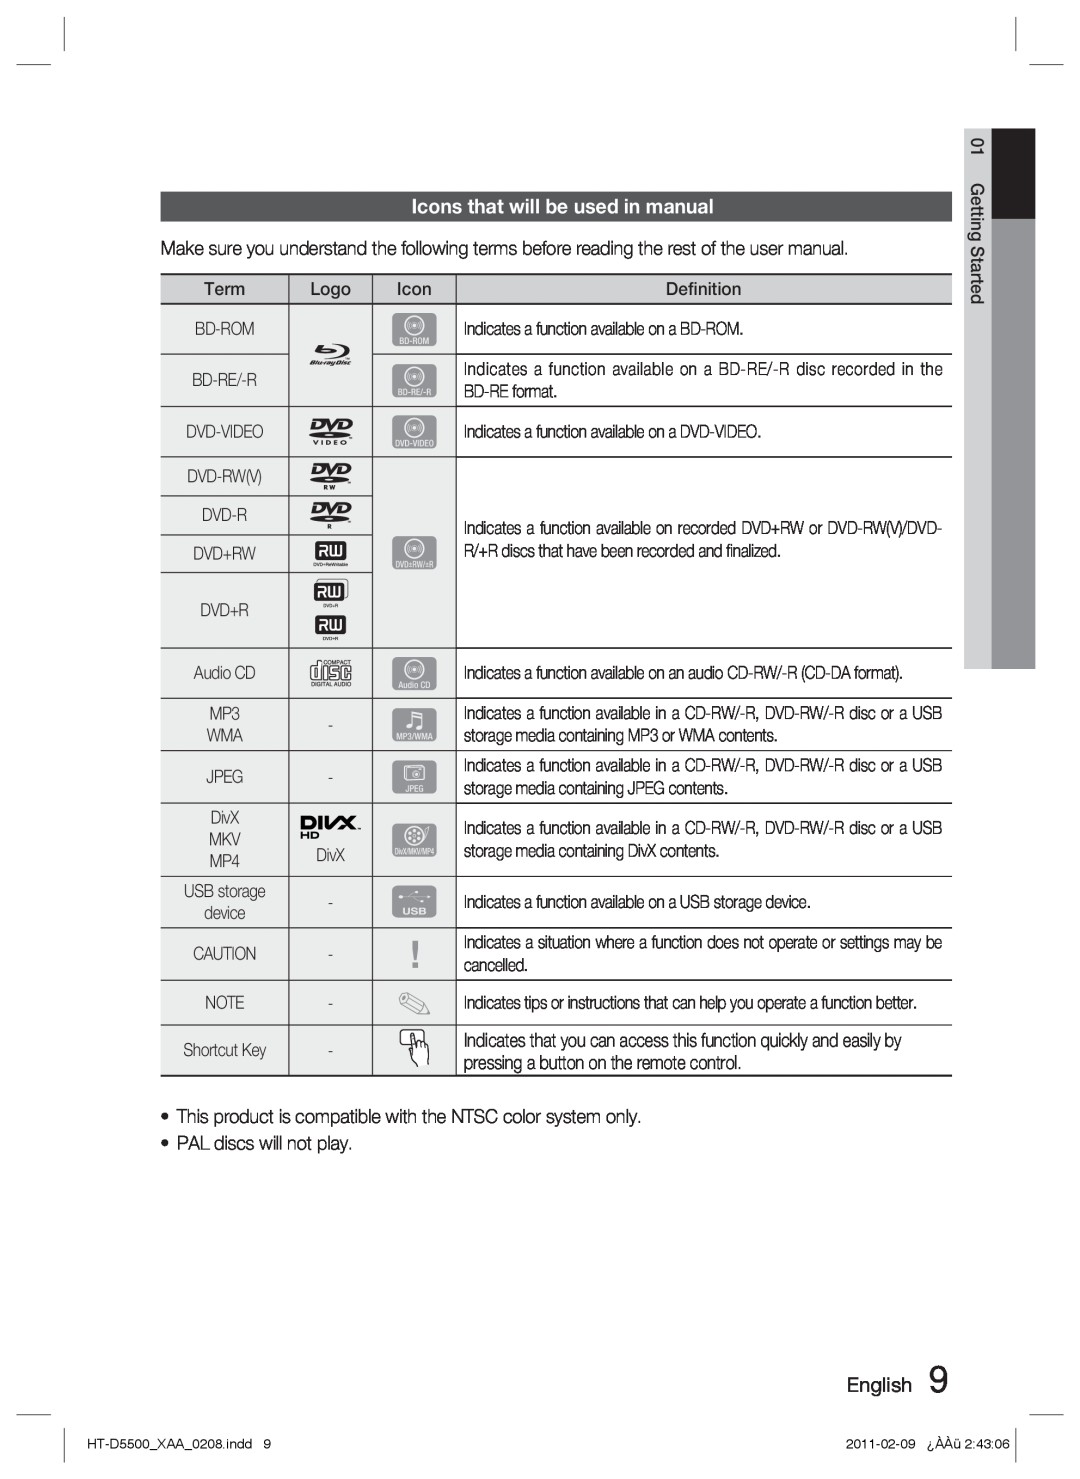 Samsung D5500 user manual Icons that will be used in manual 